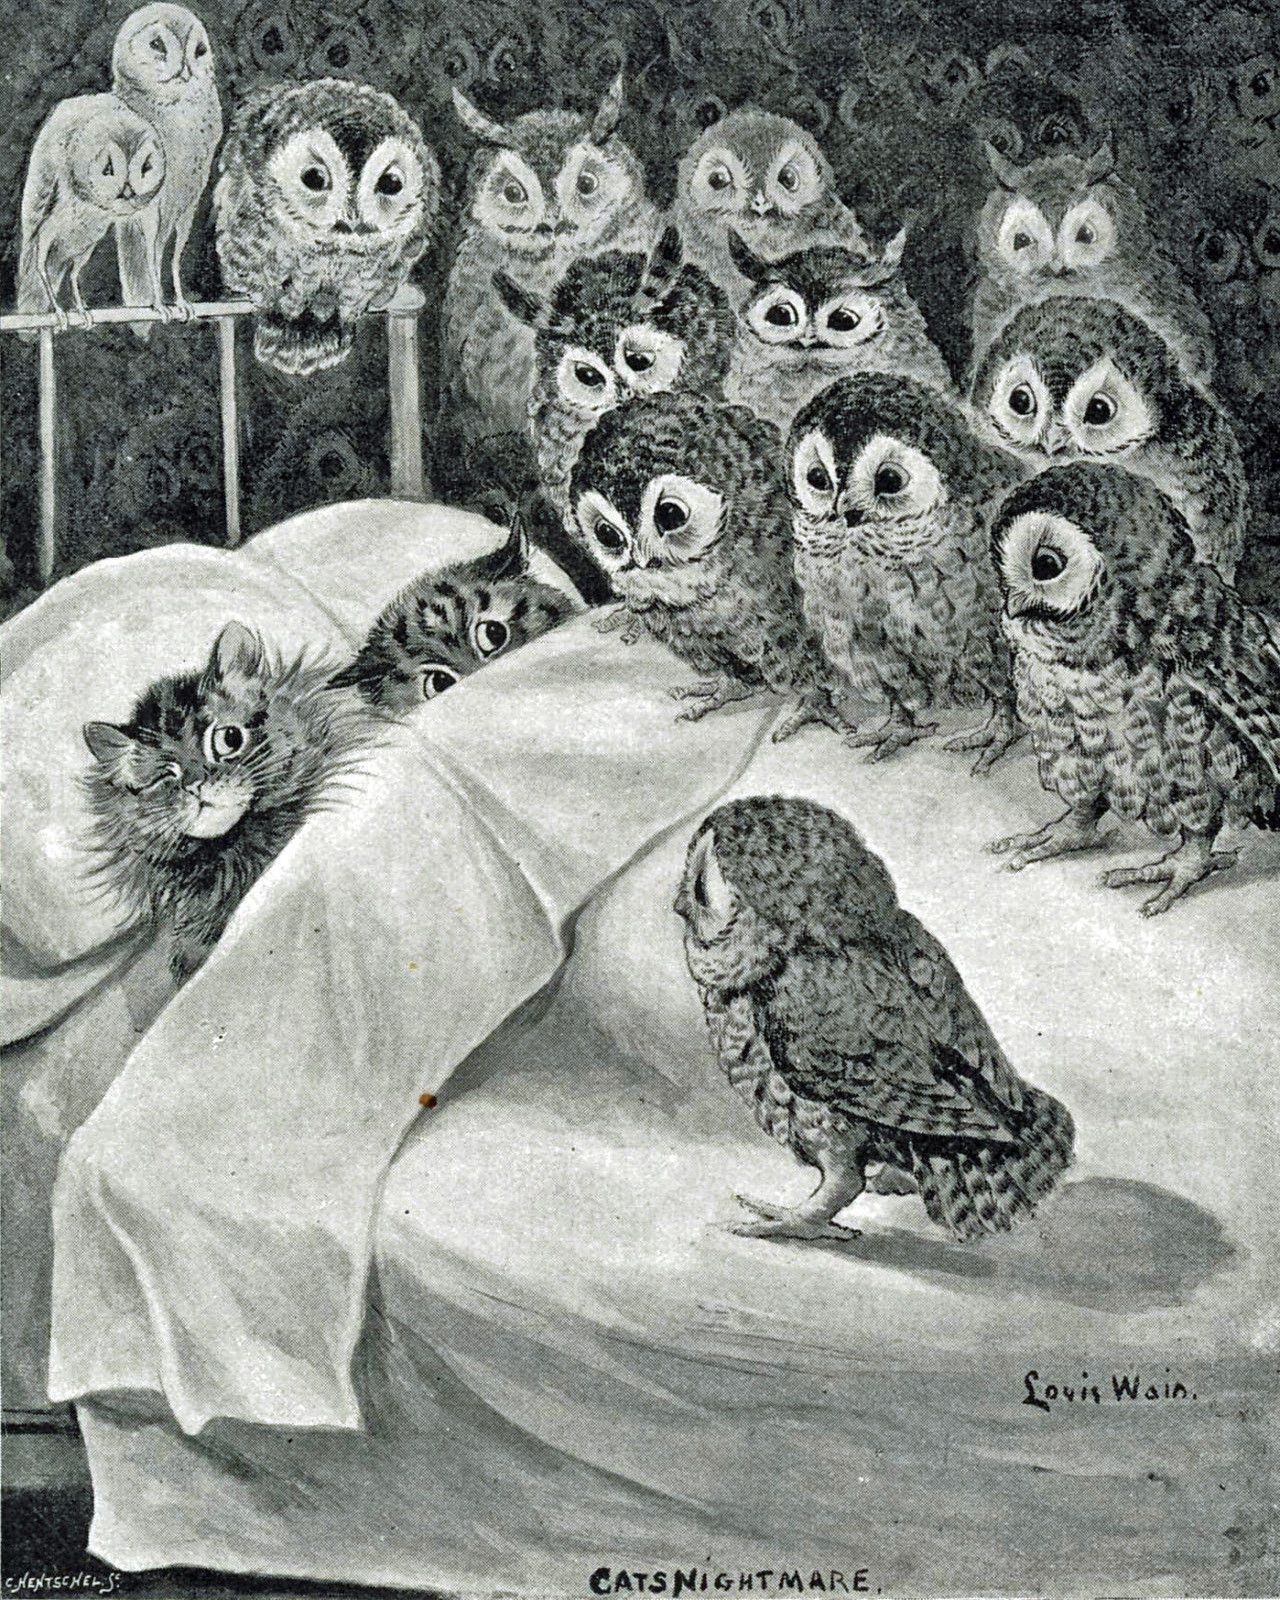 Cat's Nightmare by Louis Wain - 1907 private collection